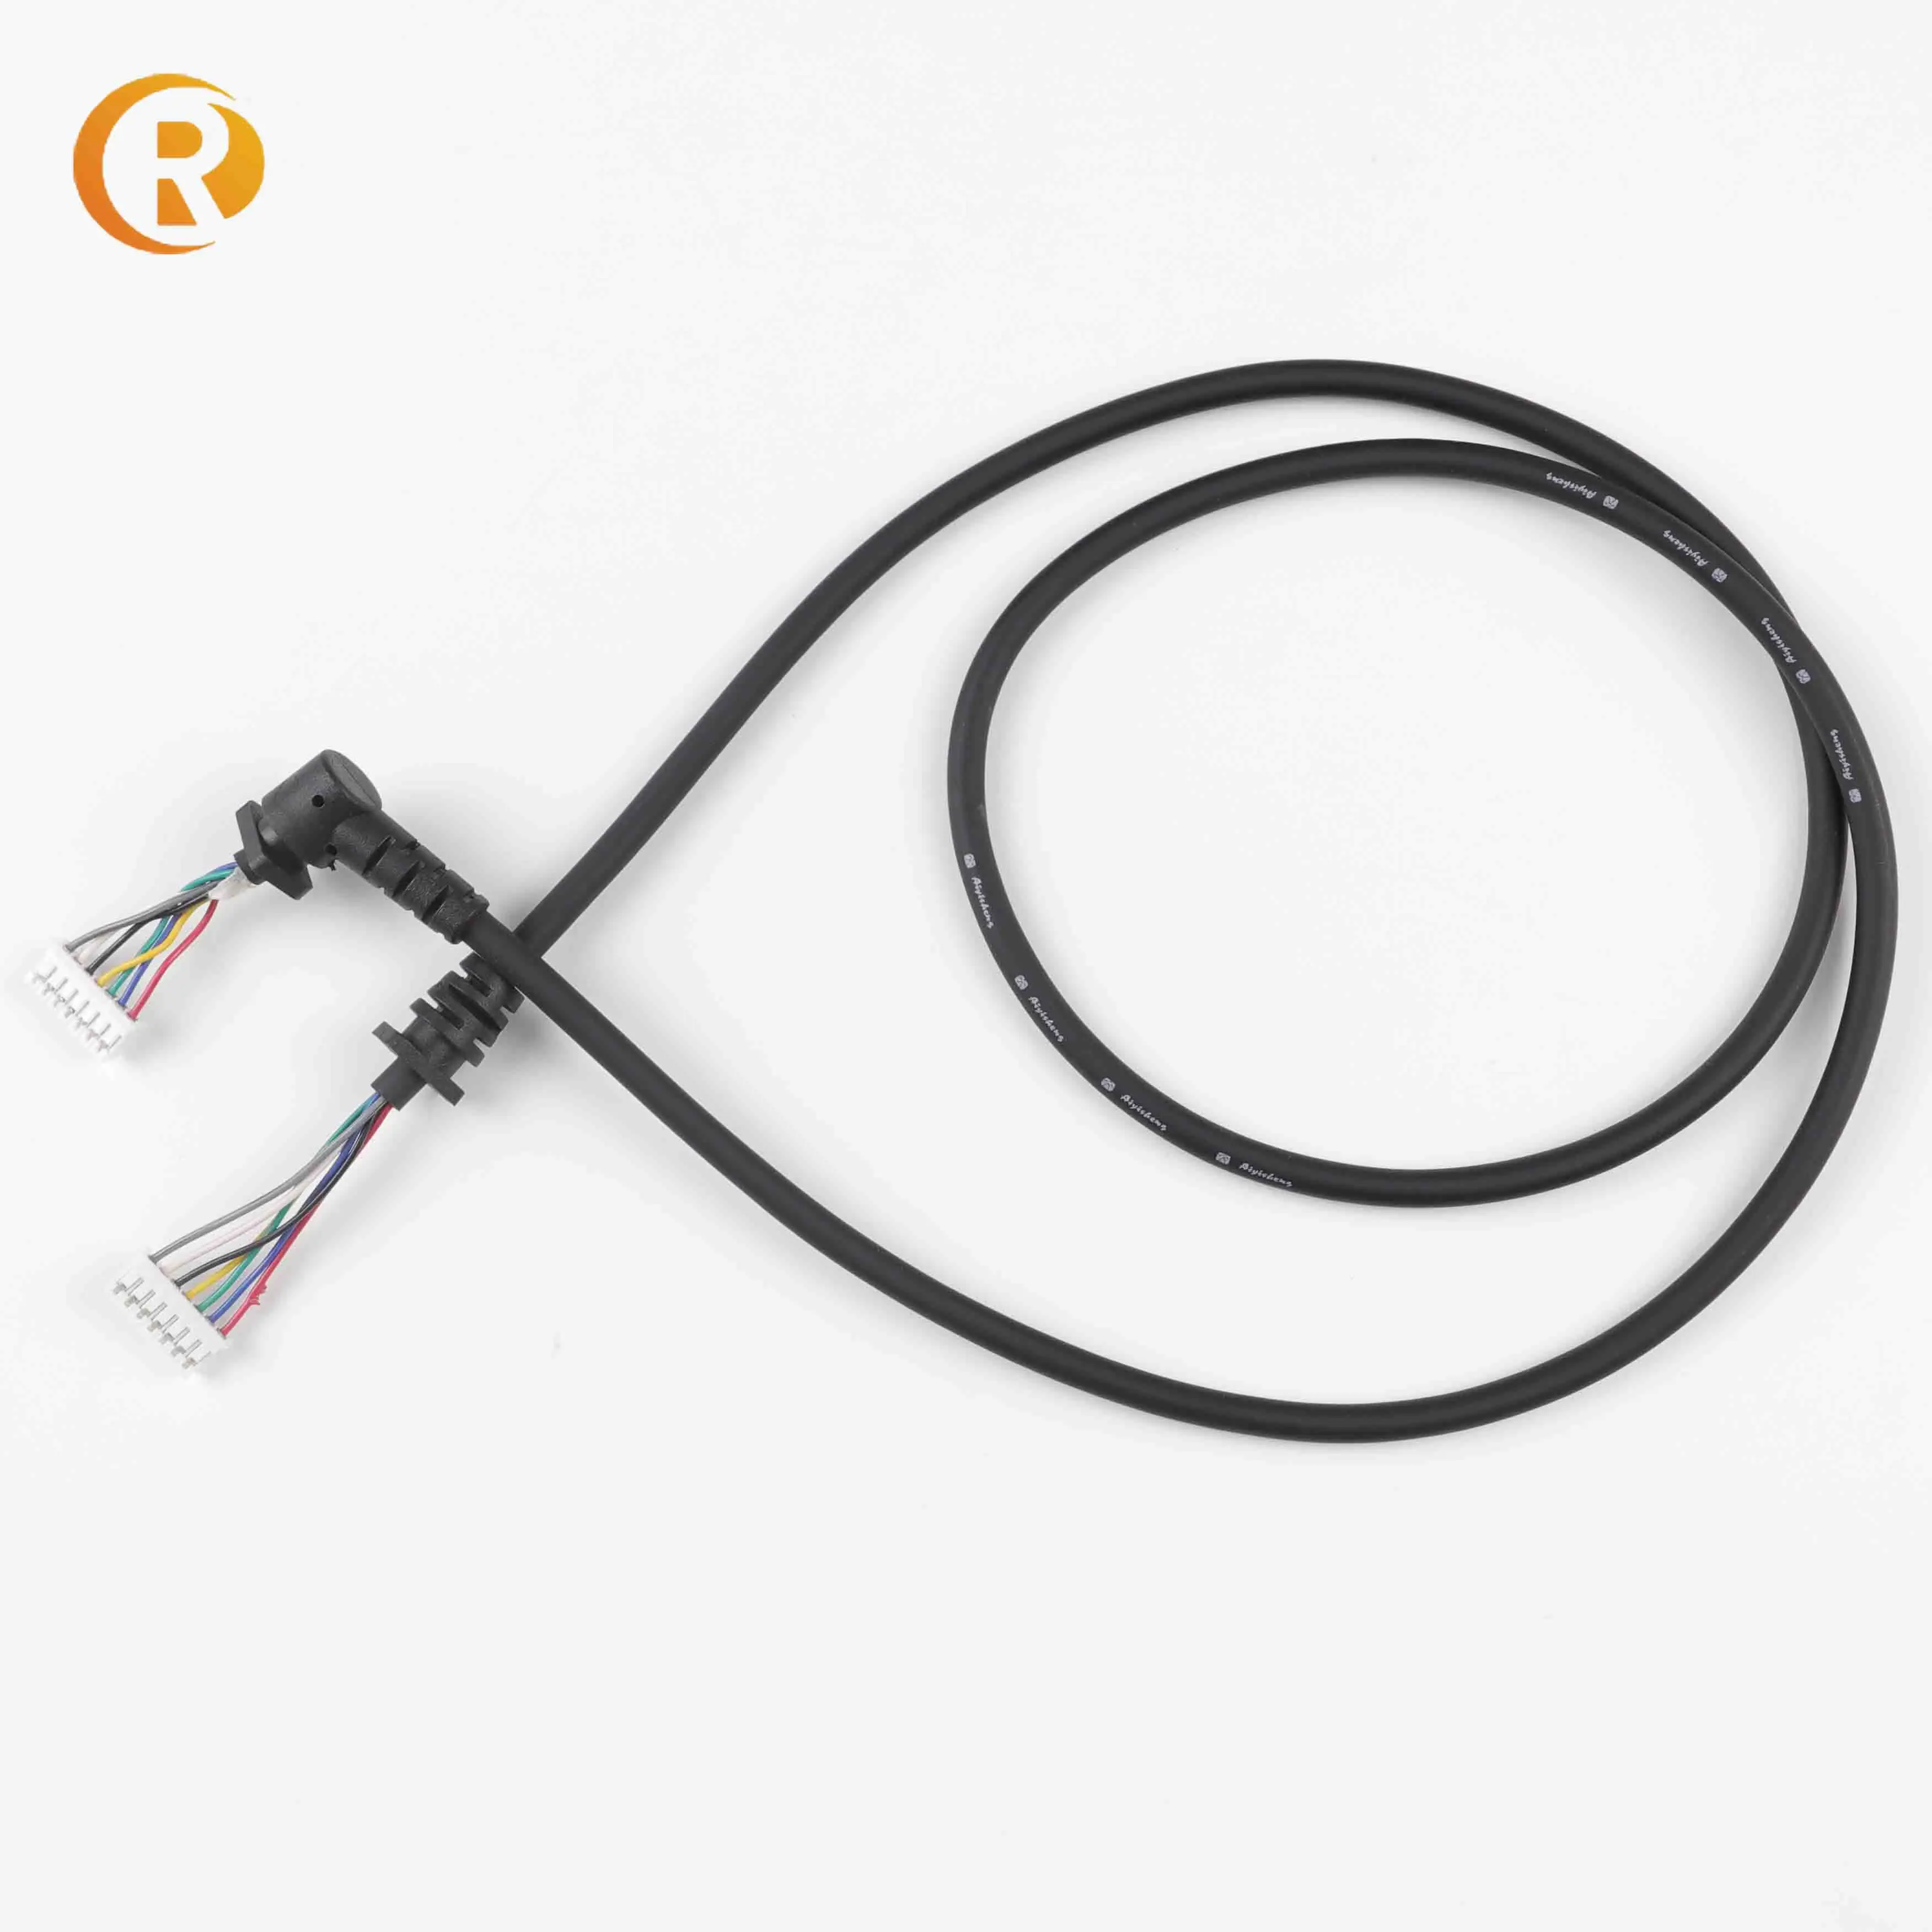 
1.0 1.5 1.25 2.0 2. 5 3.96mm pitch Jst Molex TE Tyco Amp Connector custom wire harness 